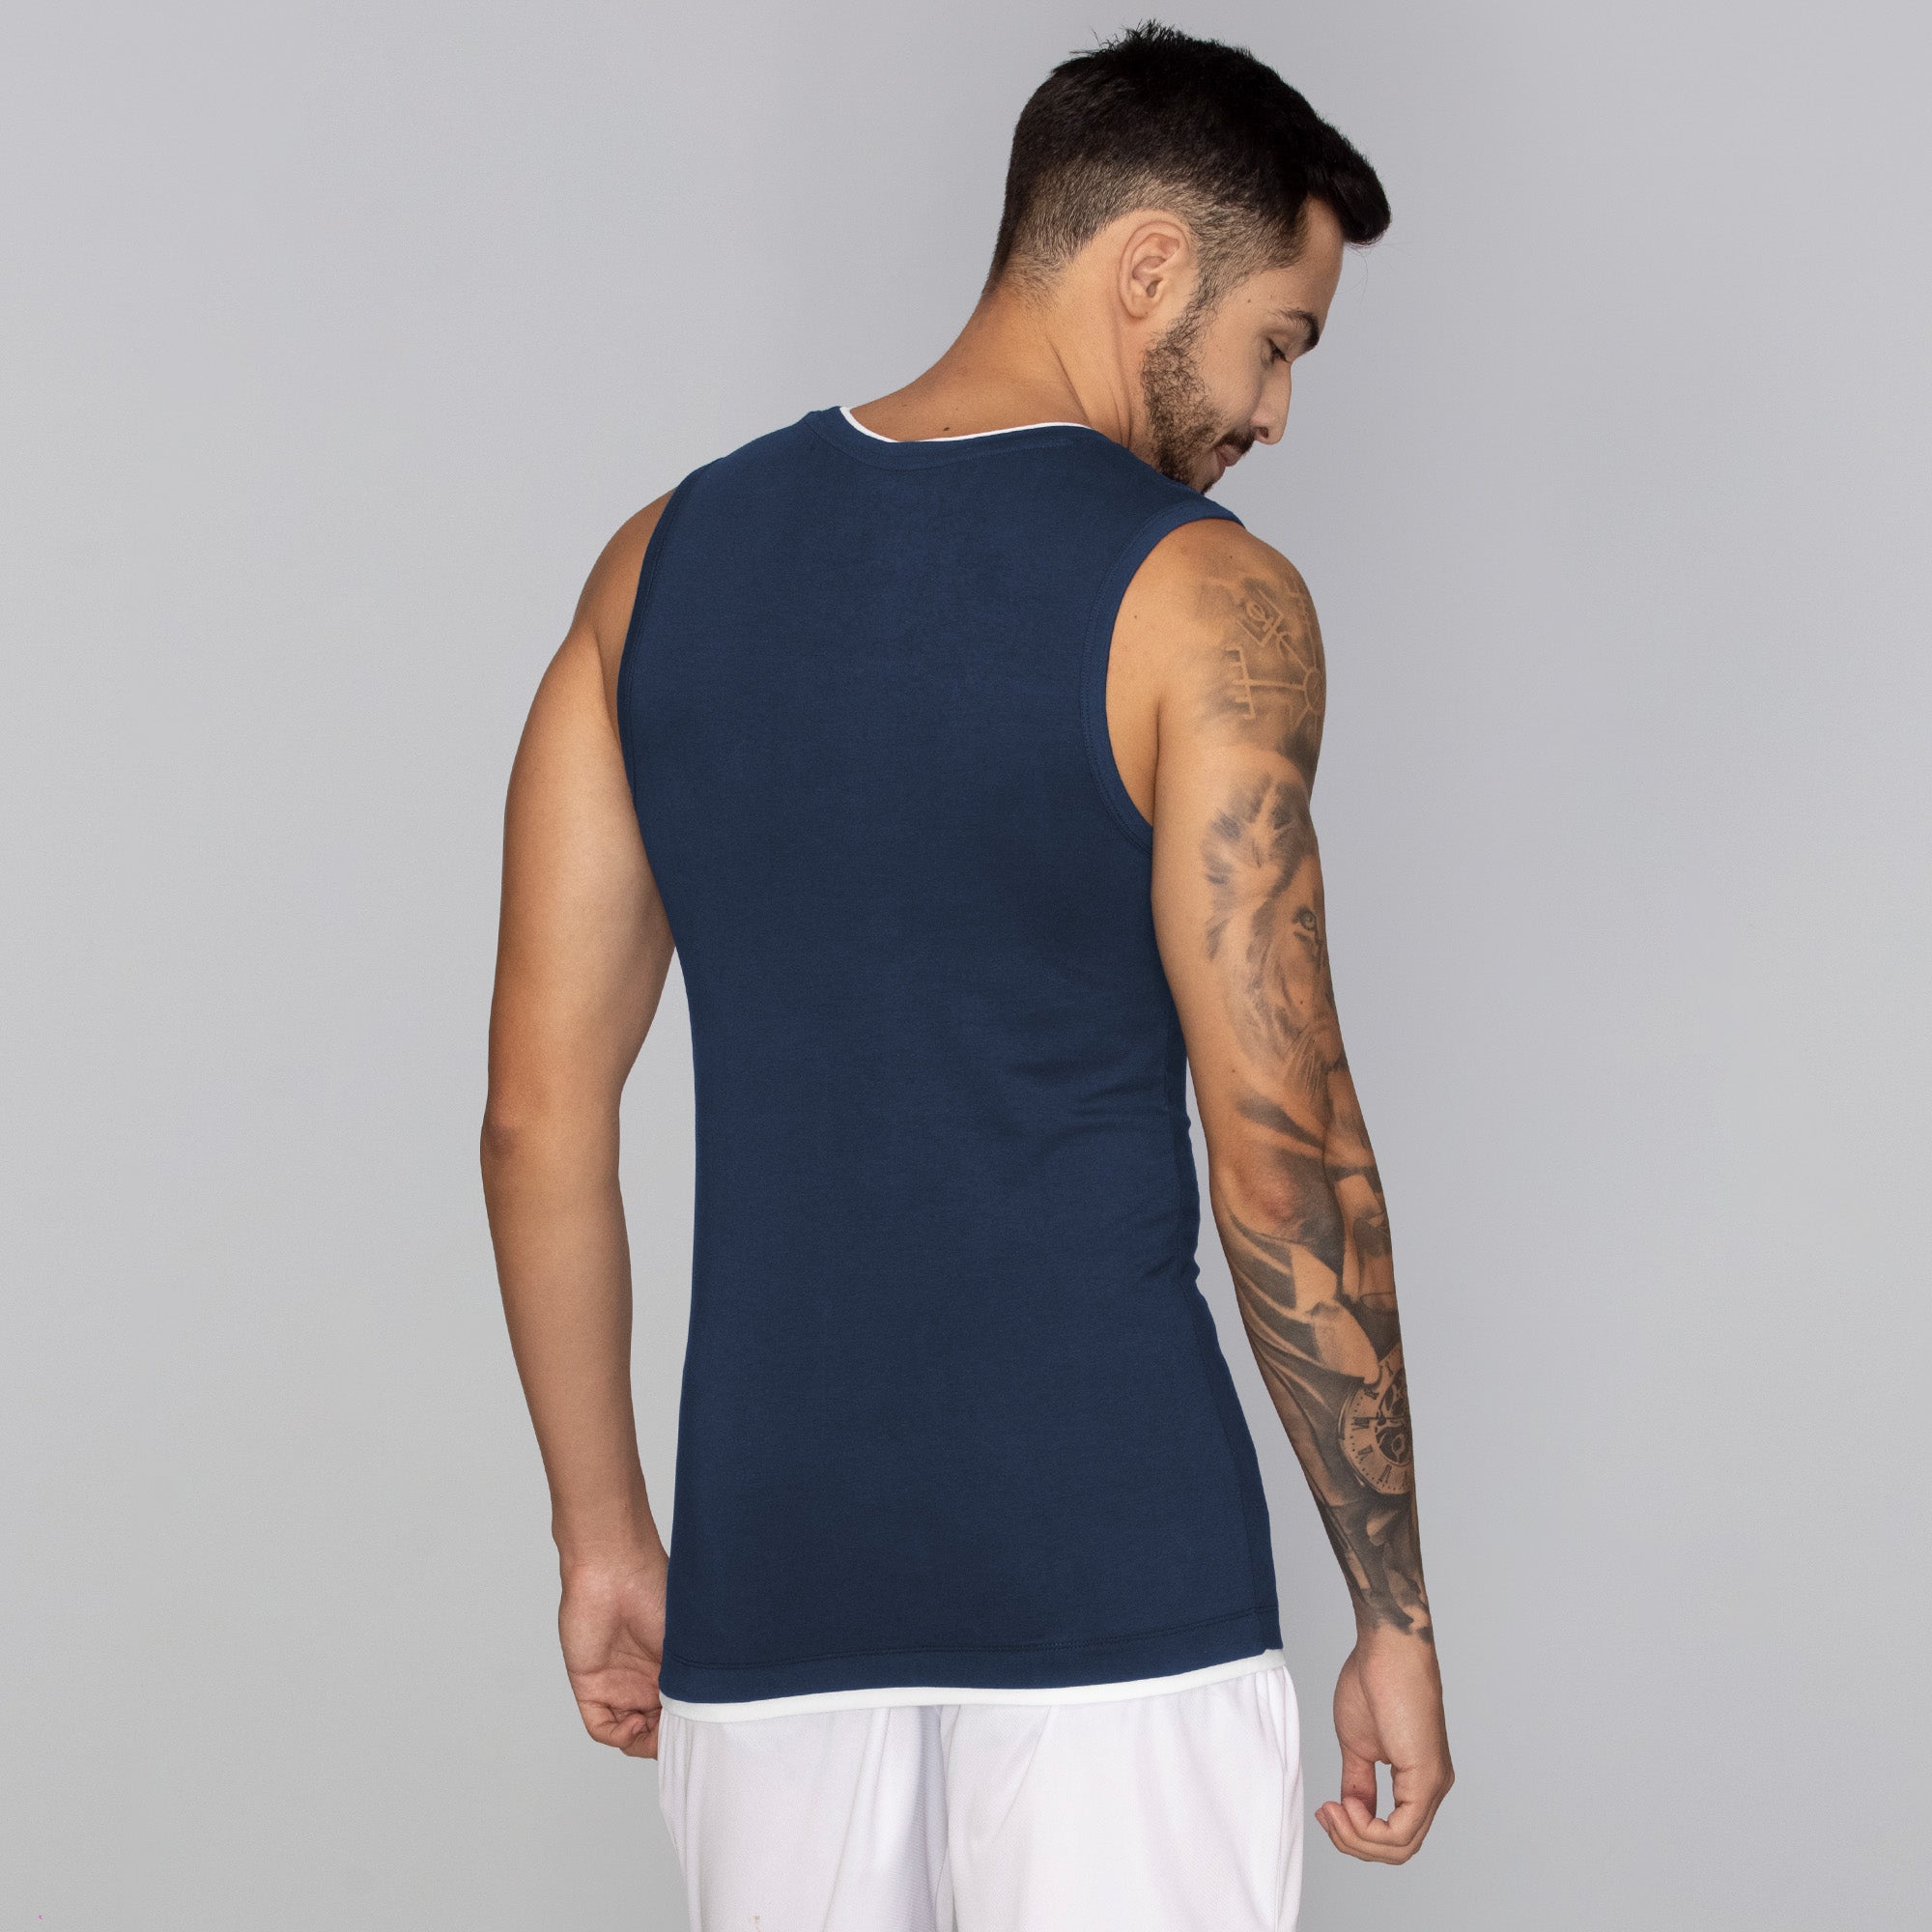 Activo Combed Cotton Gym Vests For Men Pack of 2 (Black, Navy) - XYXX Mens Apparels